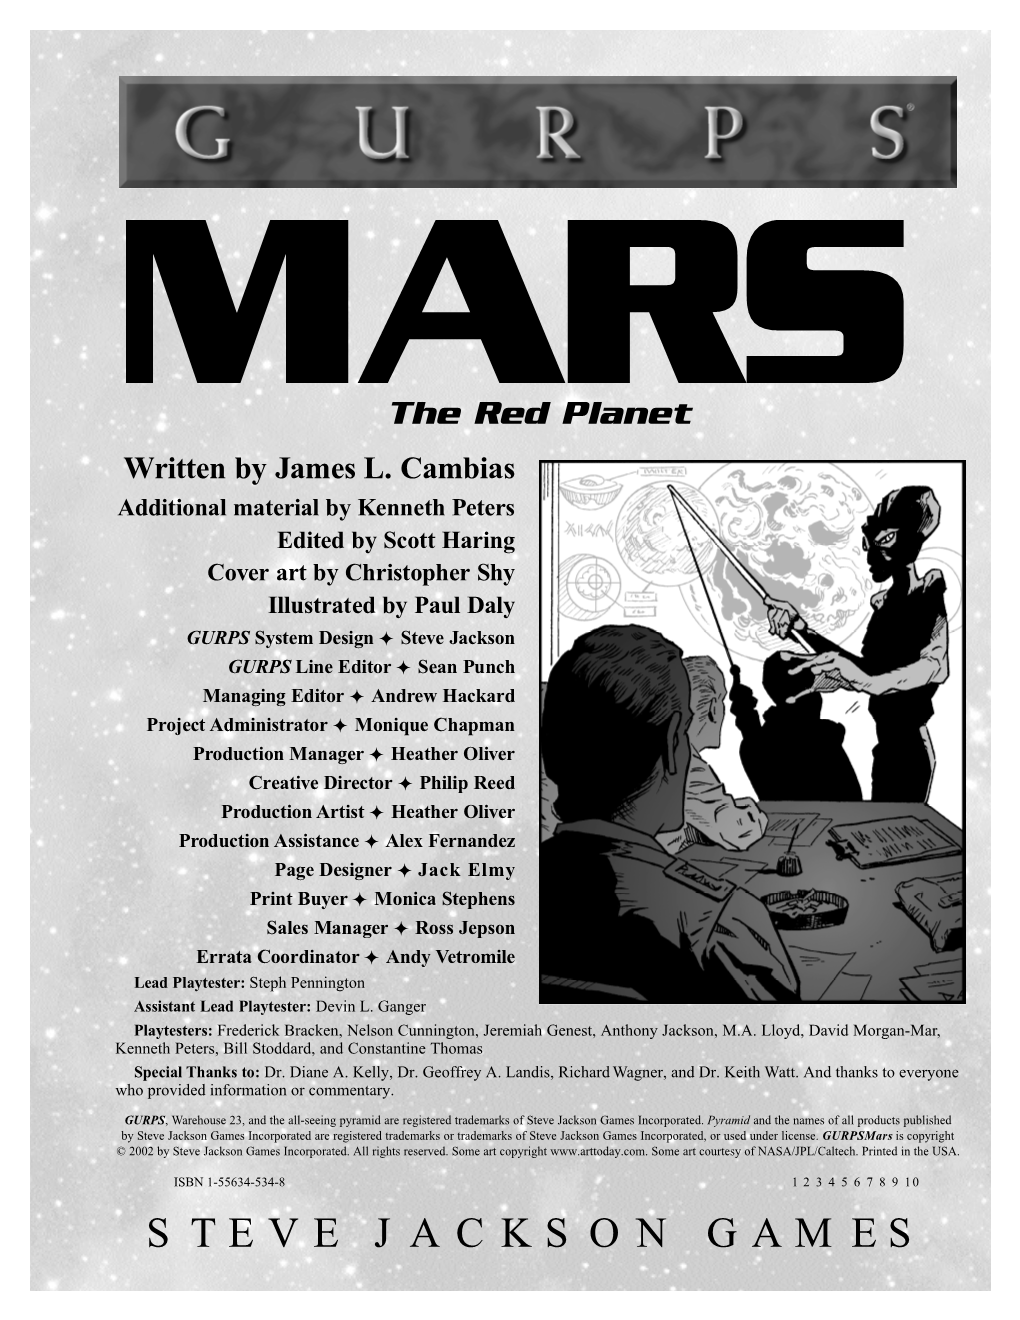 Mars in Fiction and Myth 41 Index